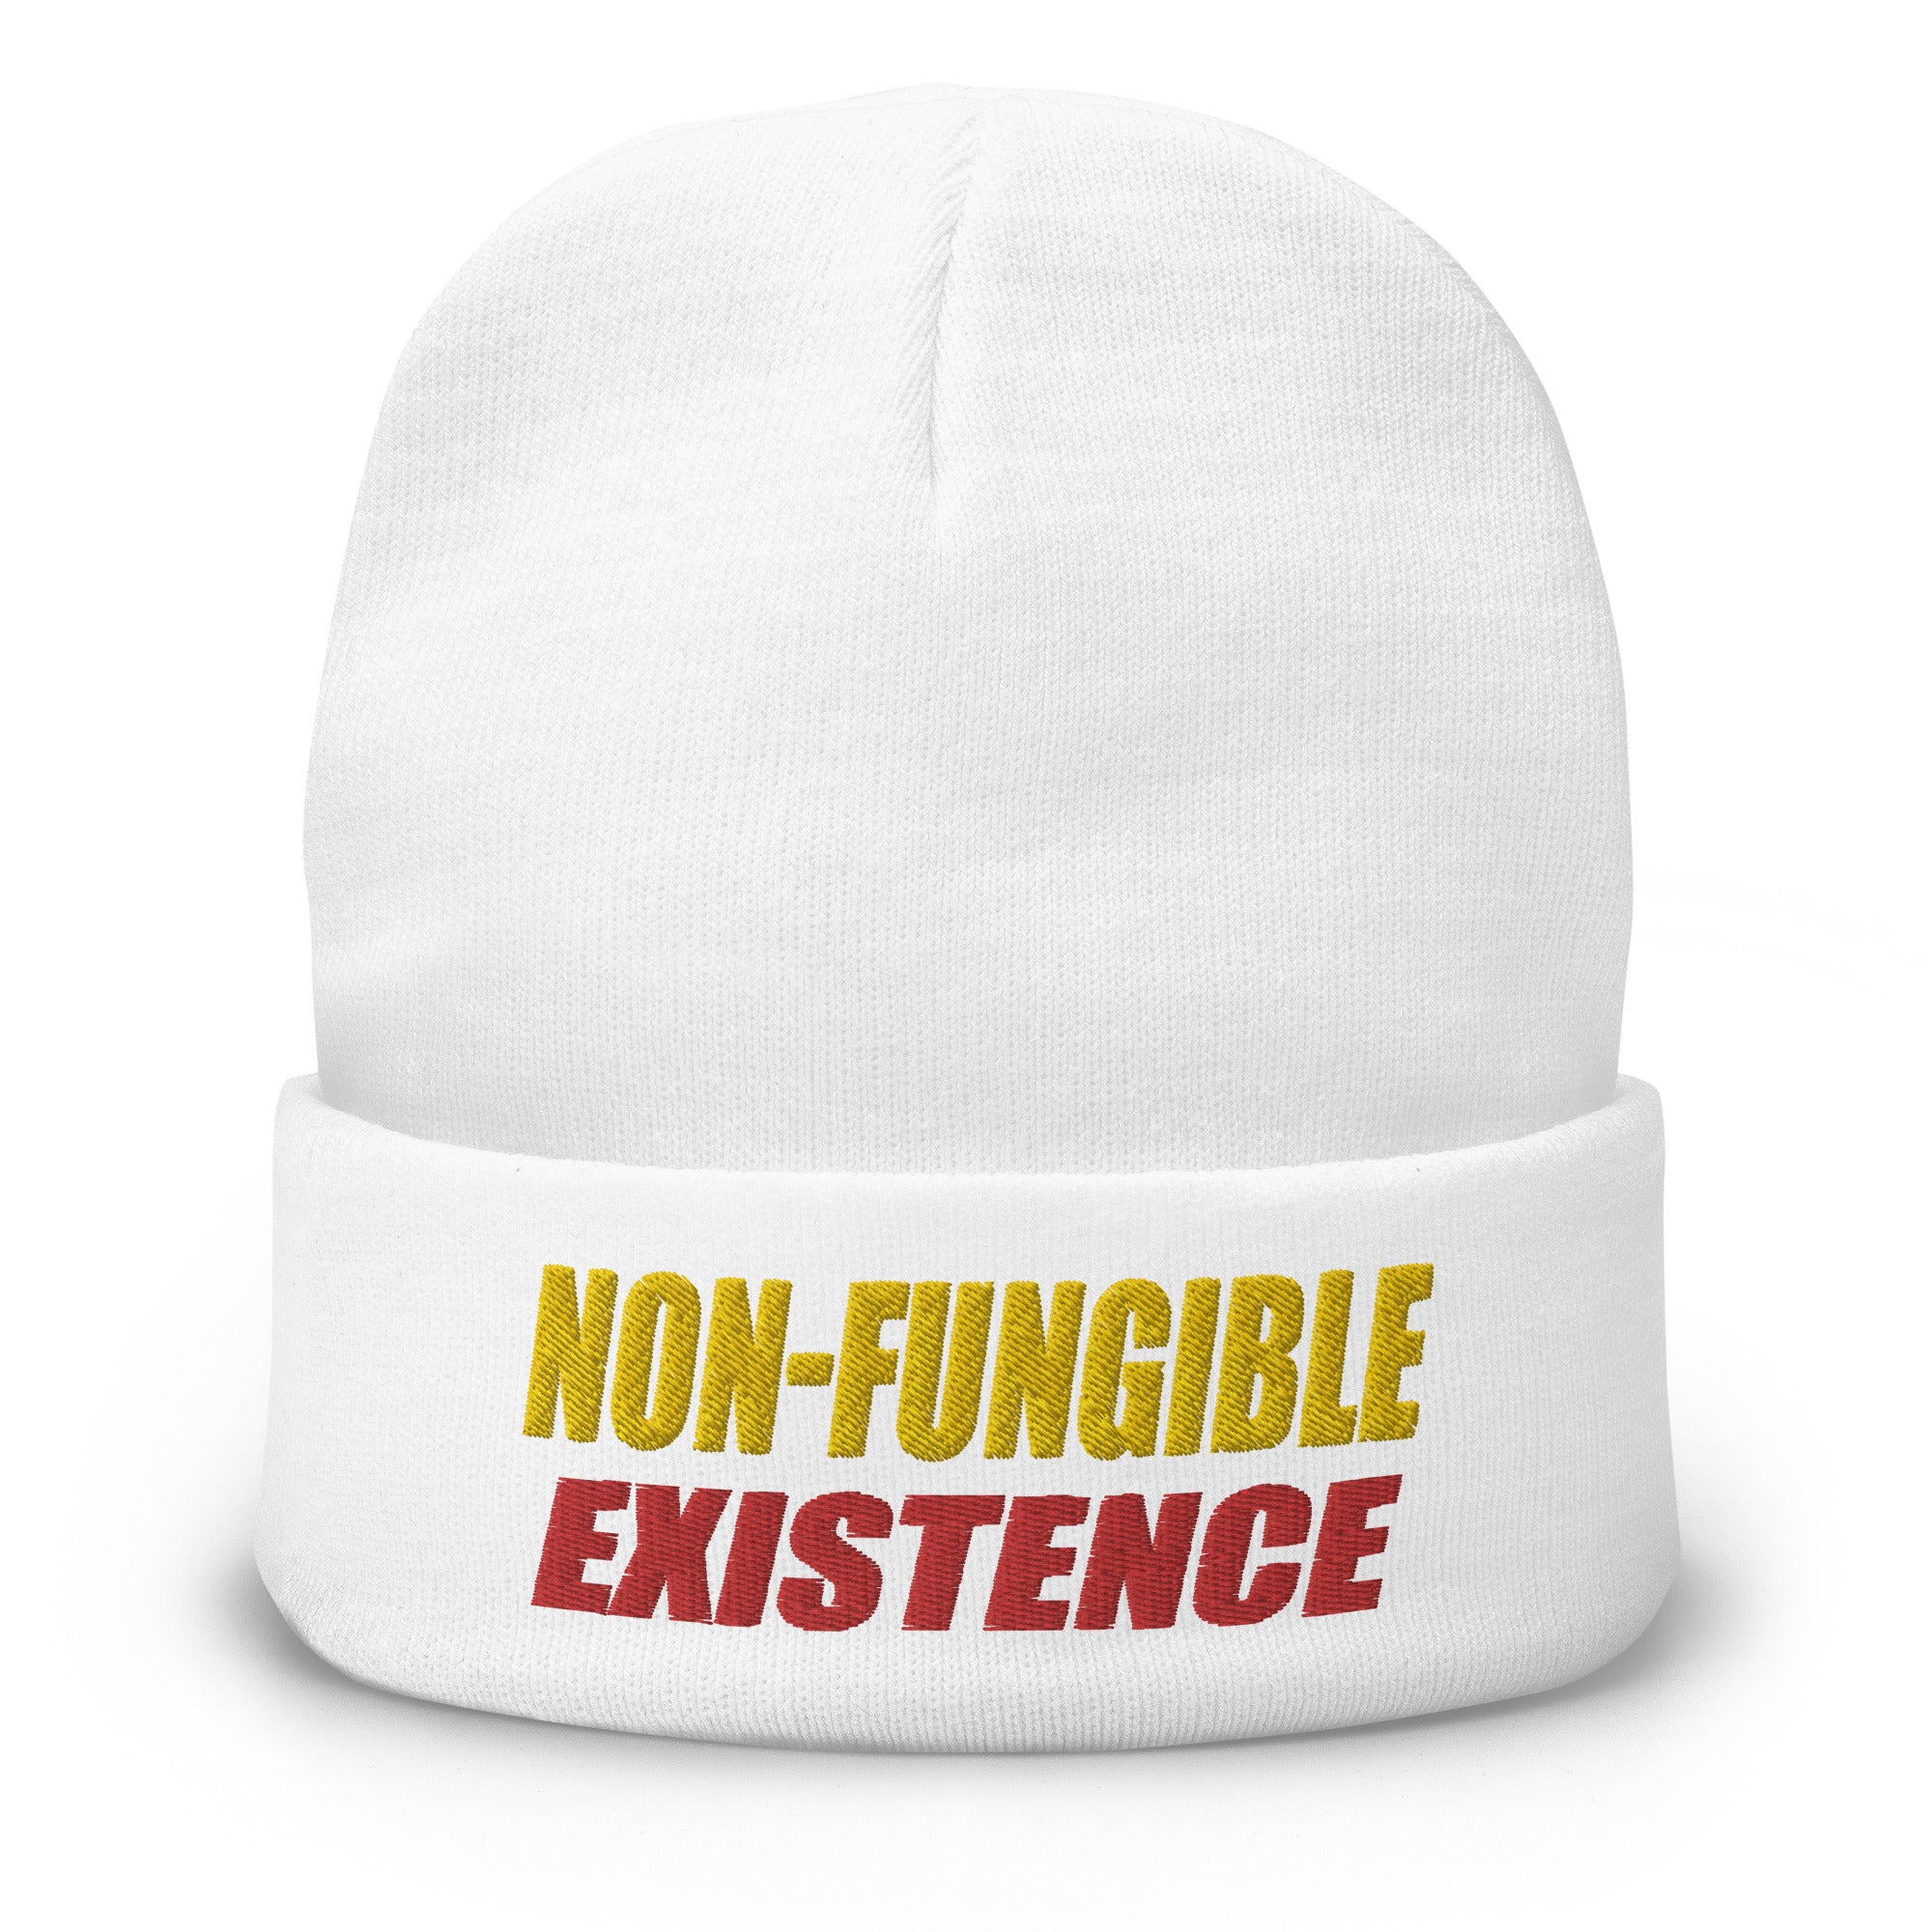 NFT Non-Fungible Existence Crypto Bitcoin Embroidered Cuff Beanie Cap